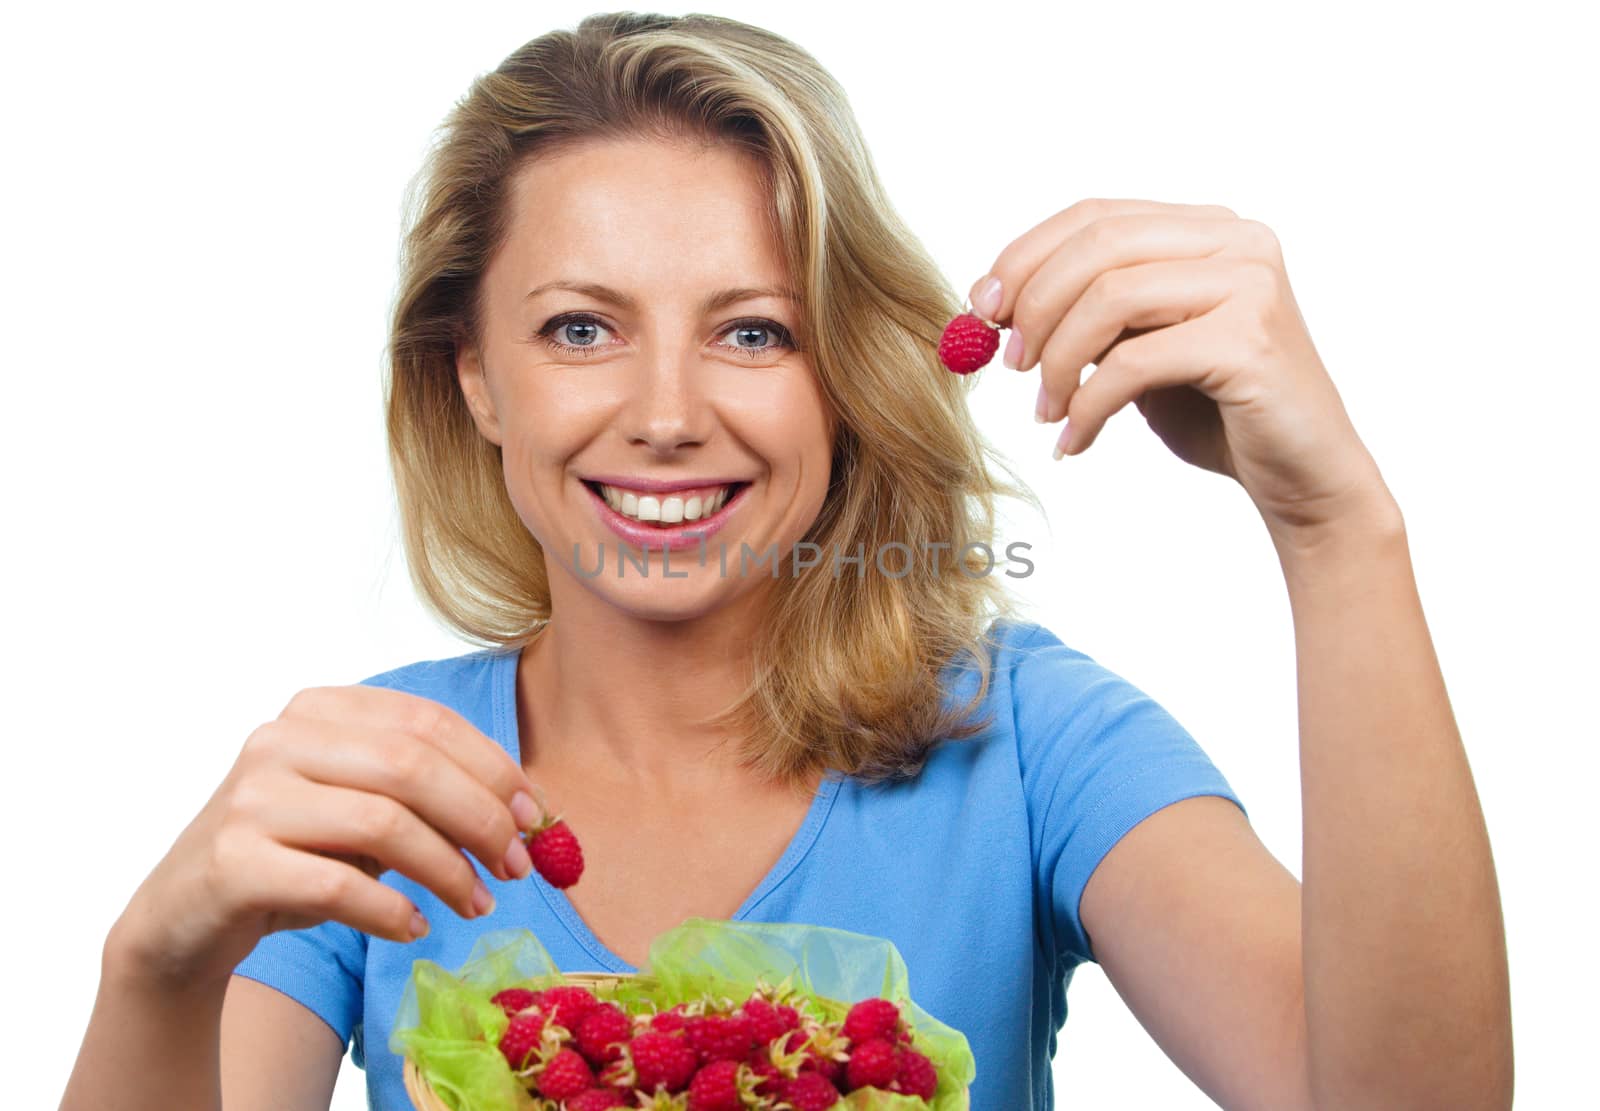 Close up of smiling woman holding raspberries by id7100